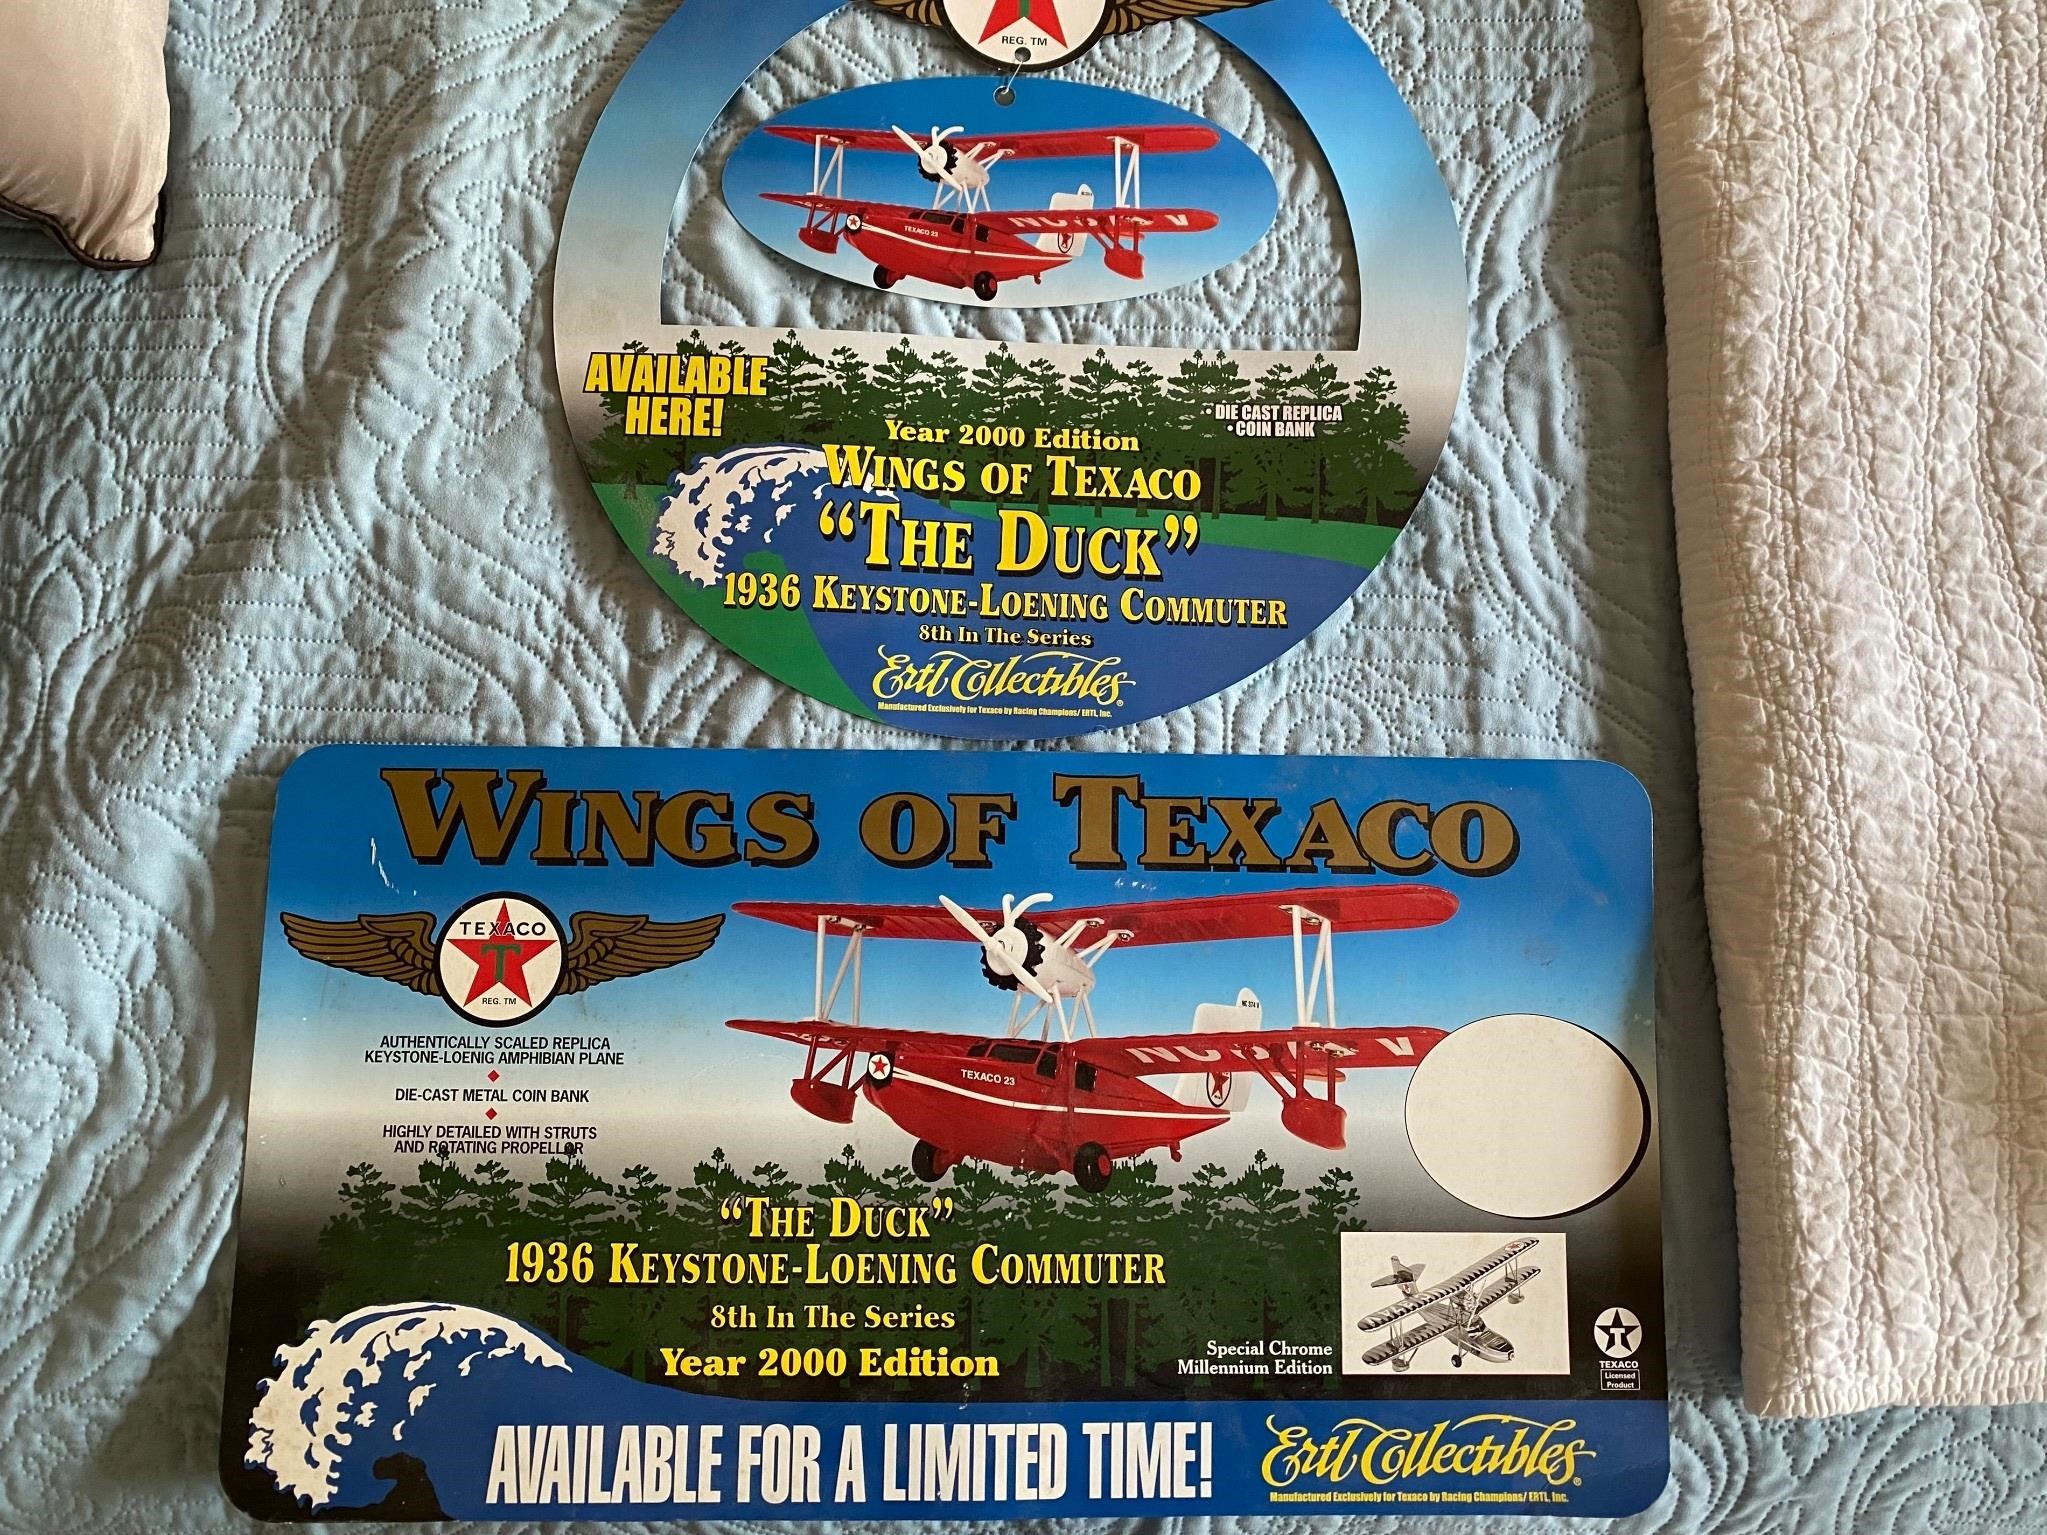 2 Wings of Texaco "The Duck" Cardboard Adv. Signs